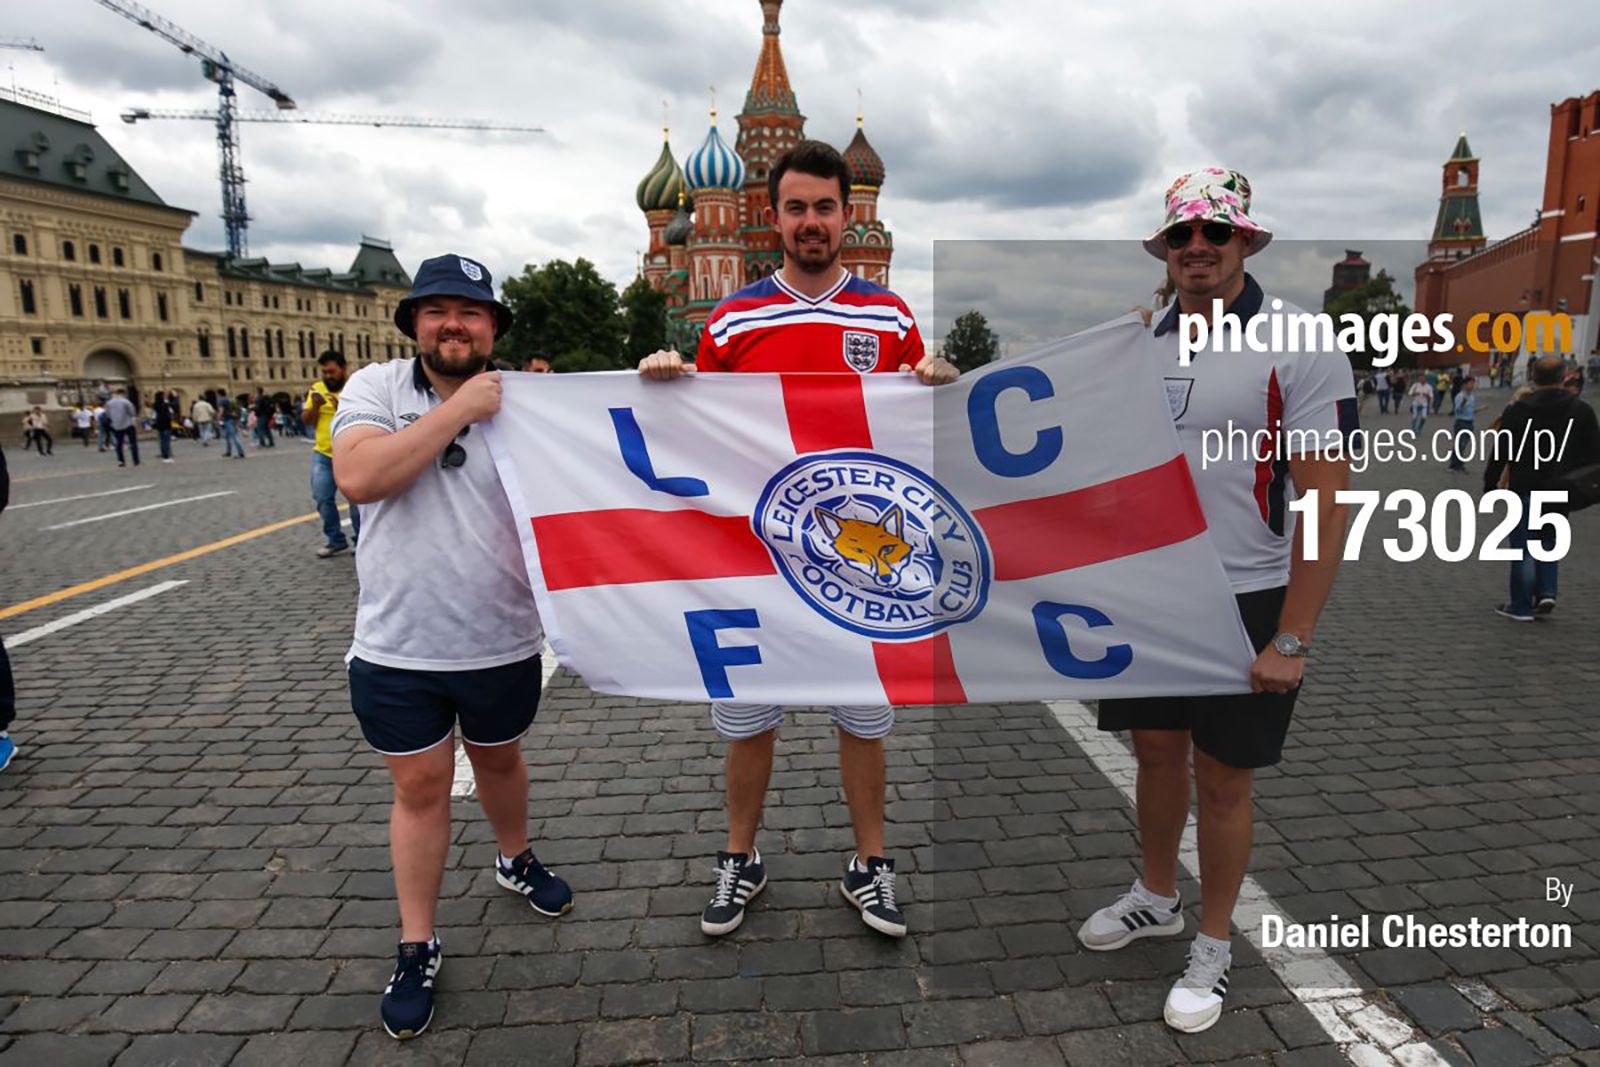 Leicester fans in Red Square before the match